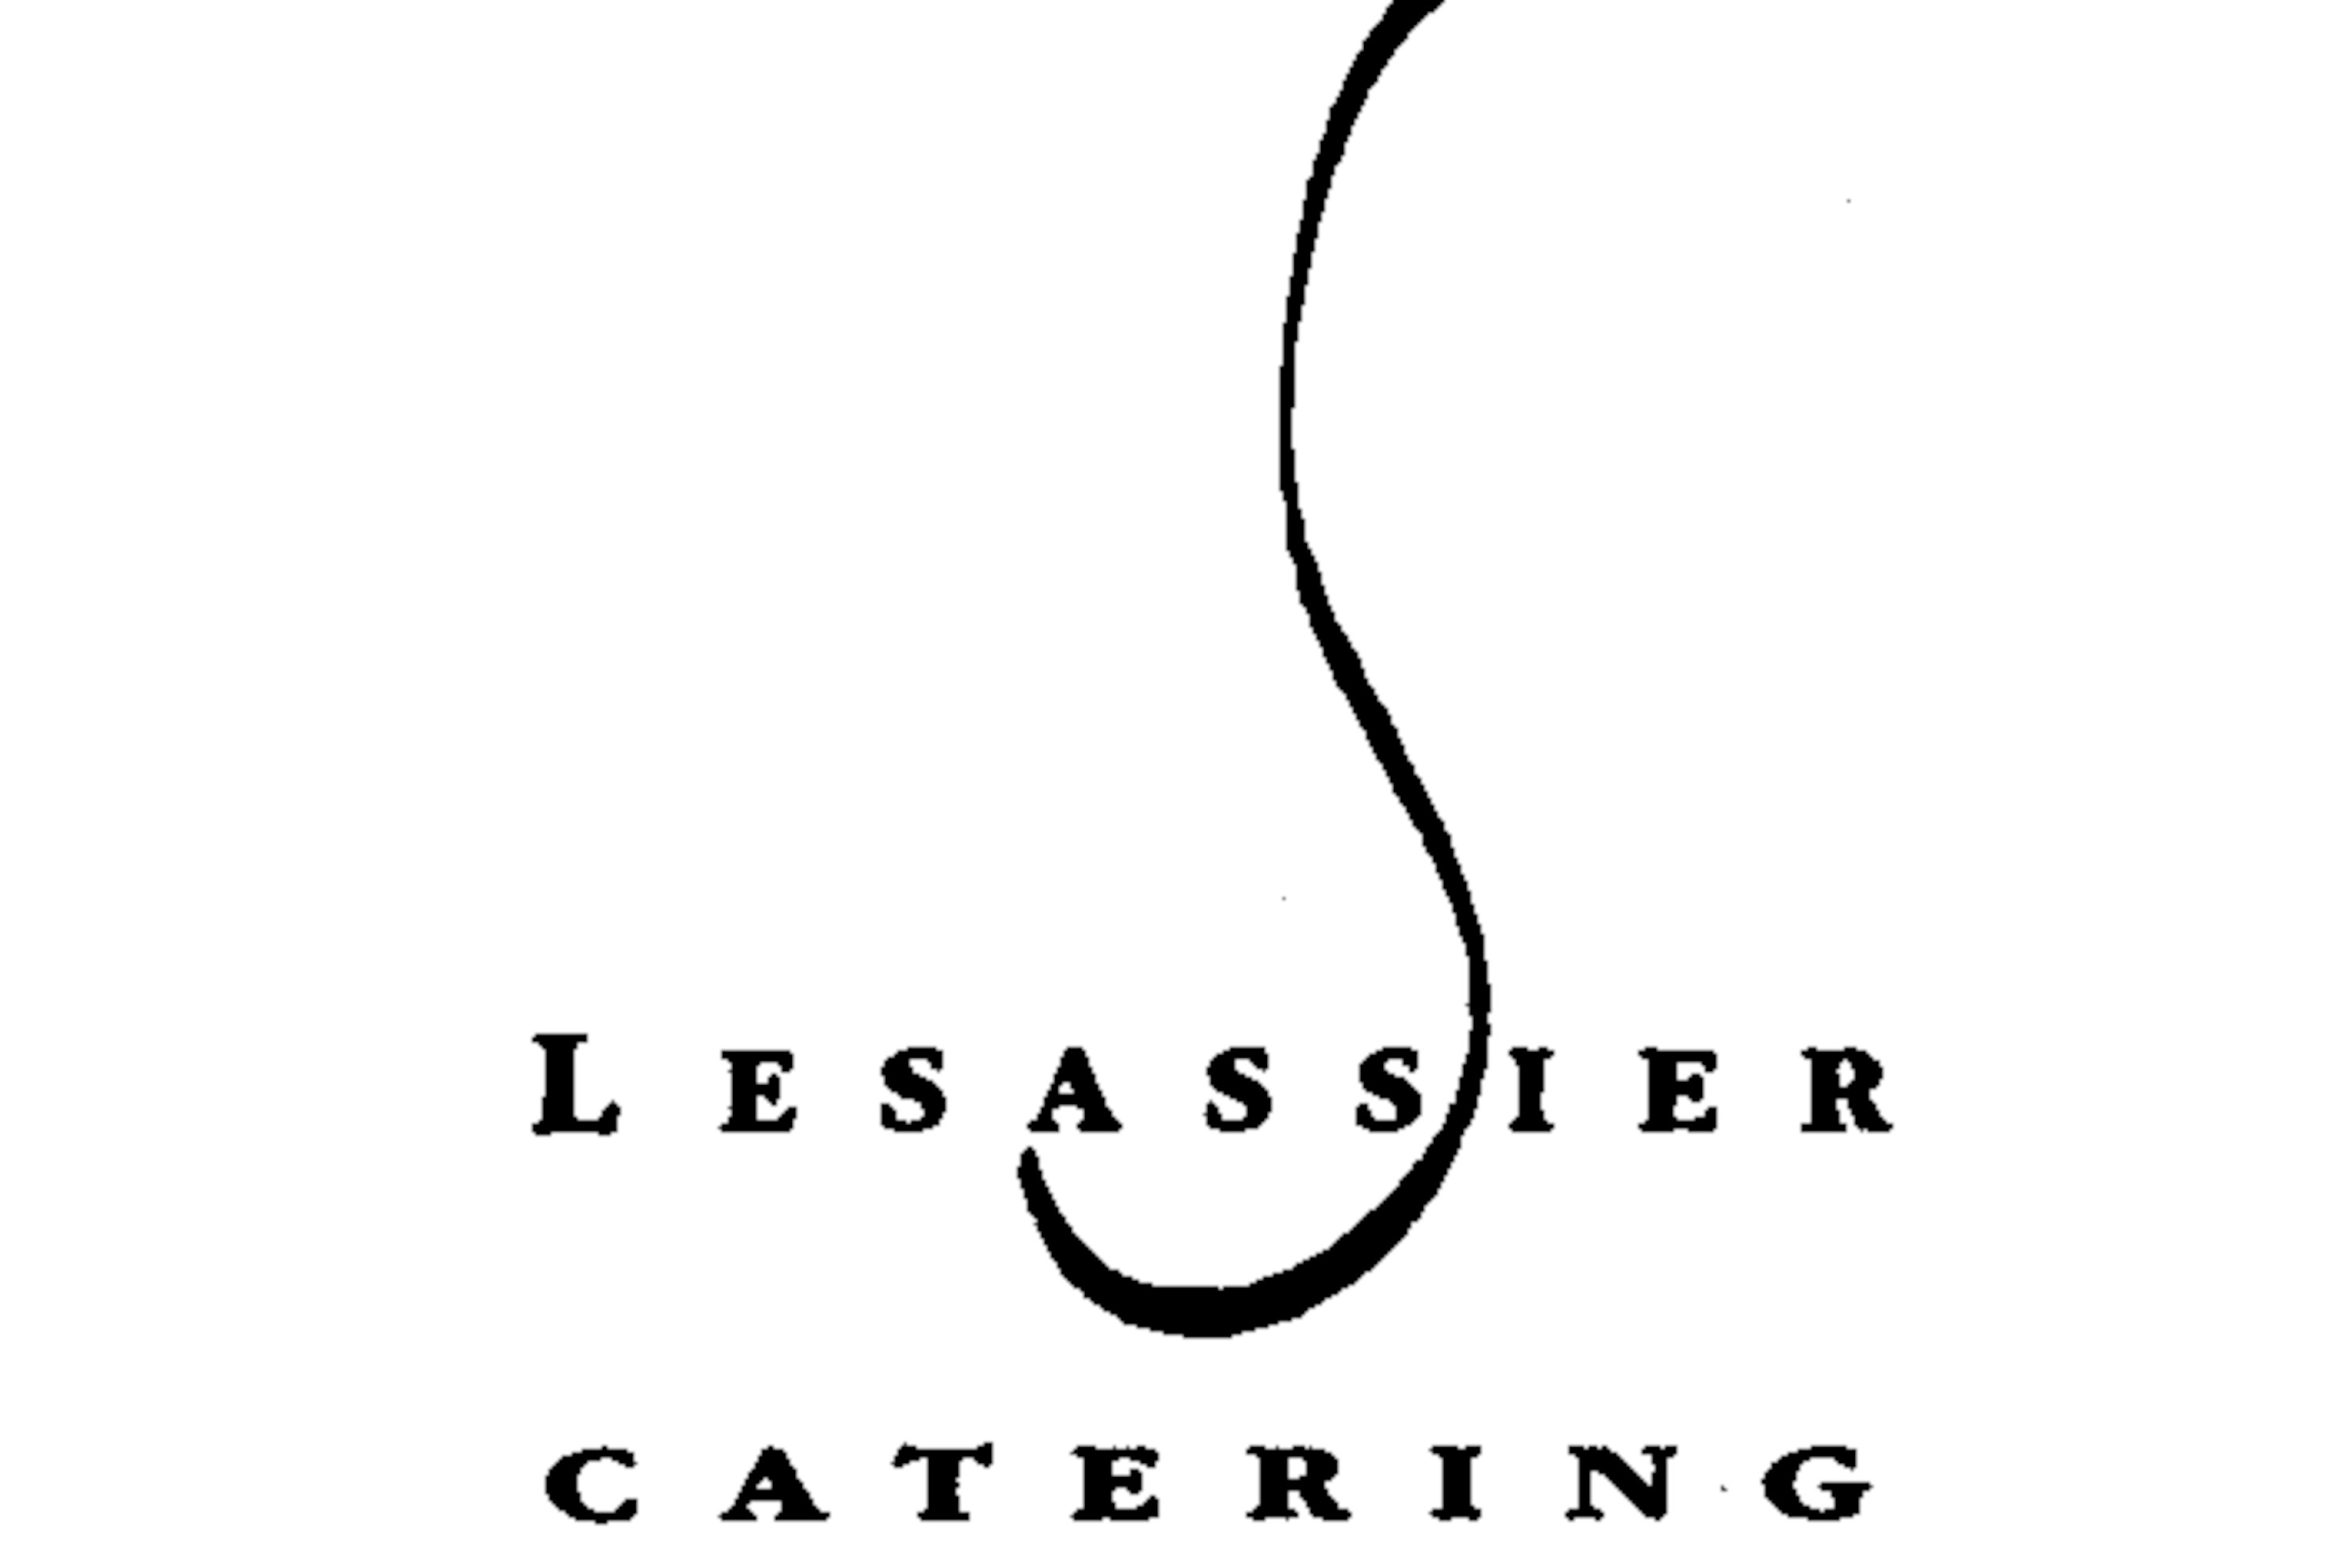 LeSassier Catering Logo reads "LeSassier Catering" in black text on top of large stylized 'S'